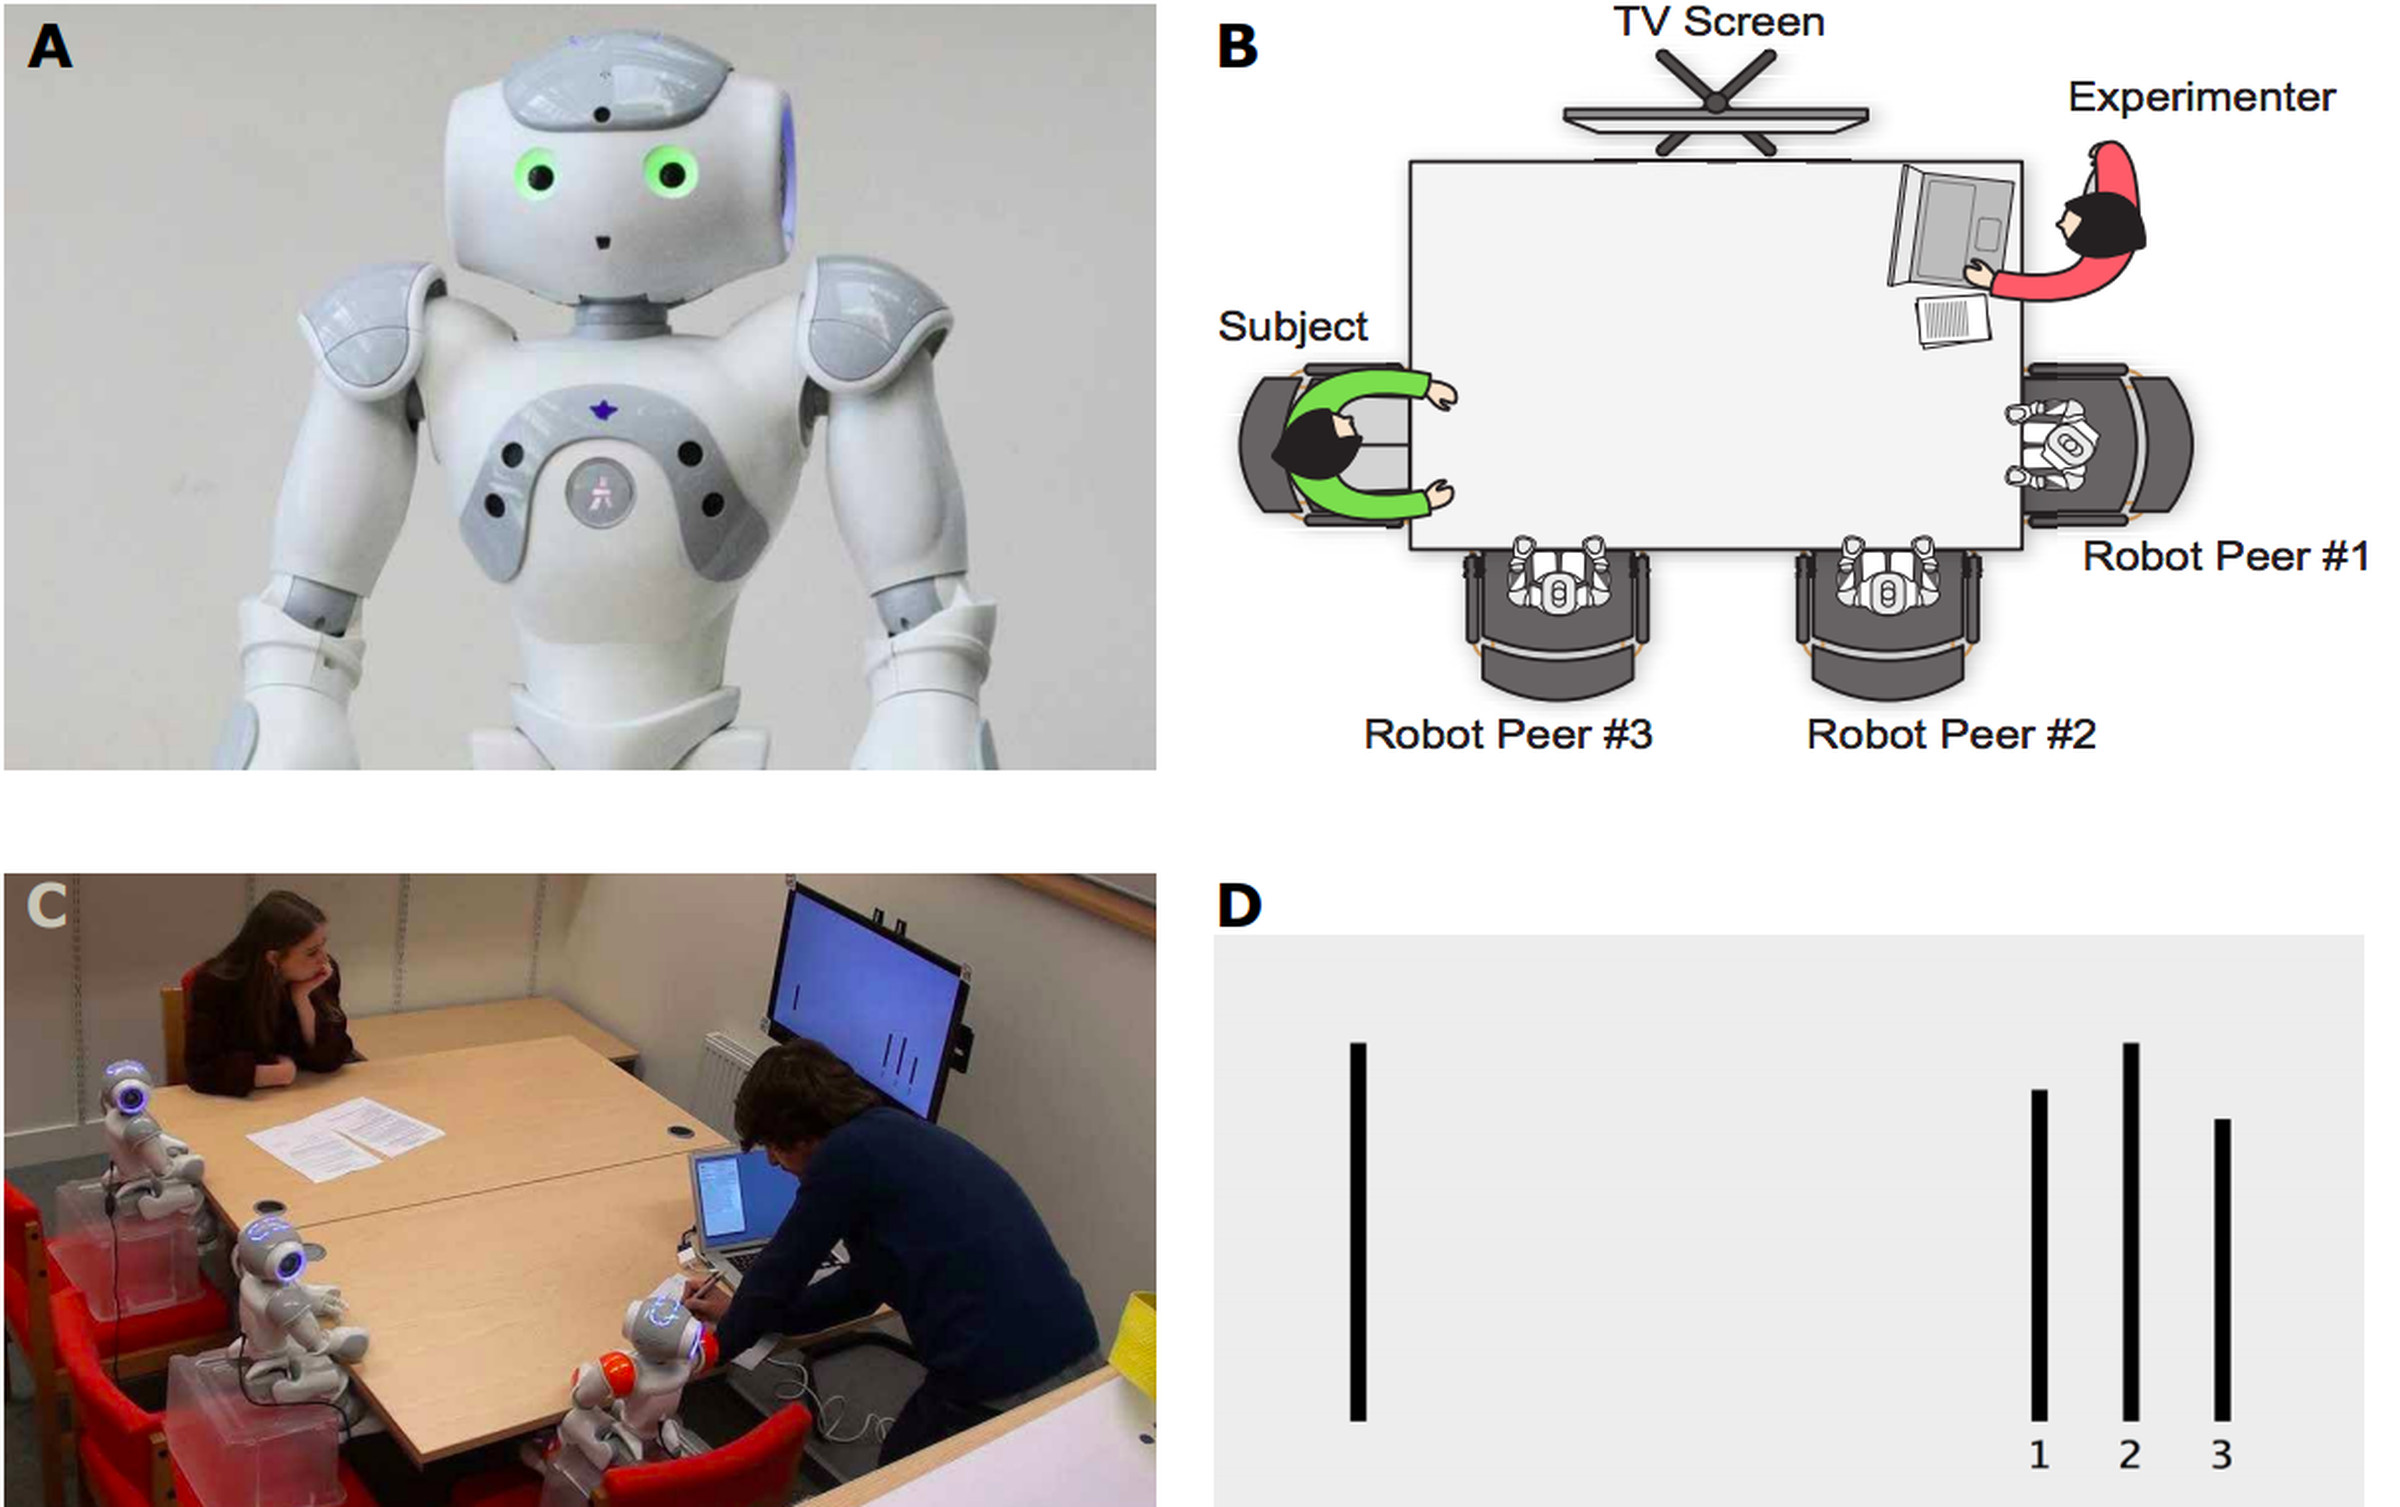 Images showing the robot used (A); the setup of the experiment (B and C); and the “vision test” as shown to participants (D). 